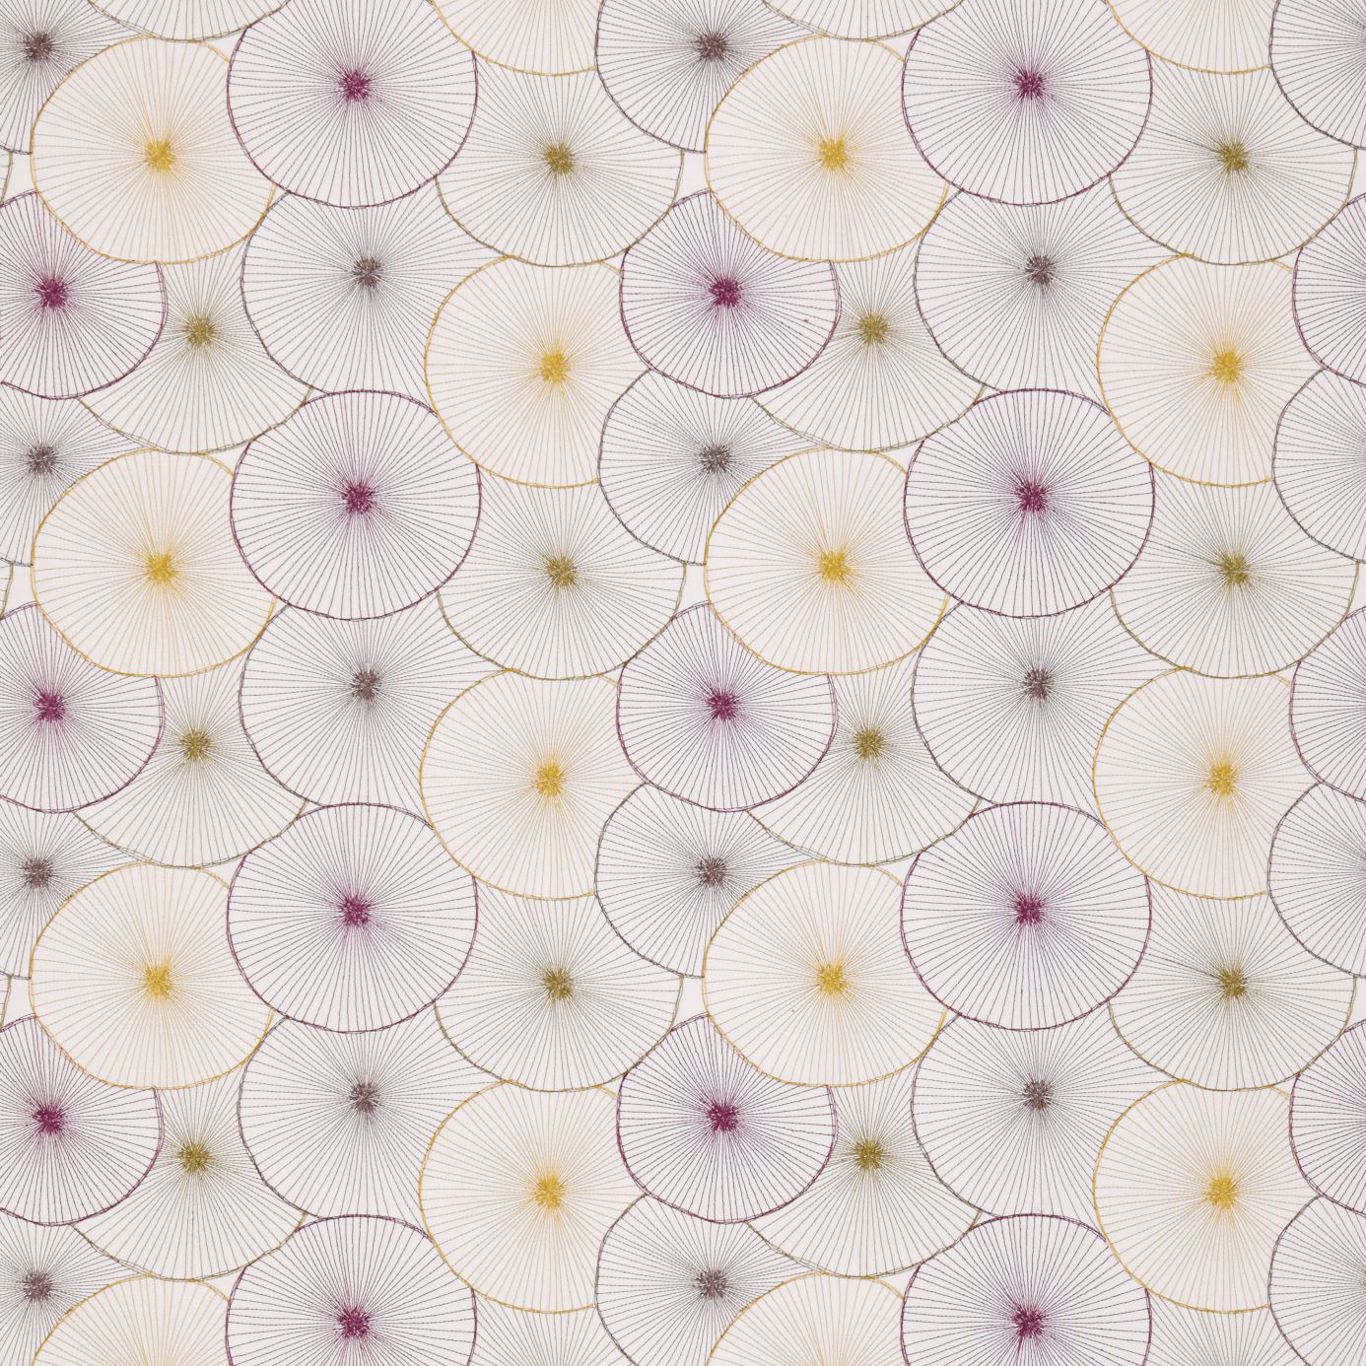 Aster Chartreuse / Plum / Truffle / Gold Fabric by HAR